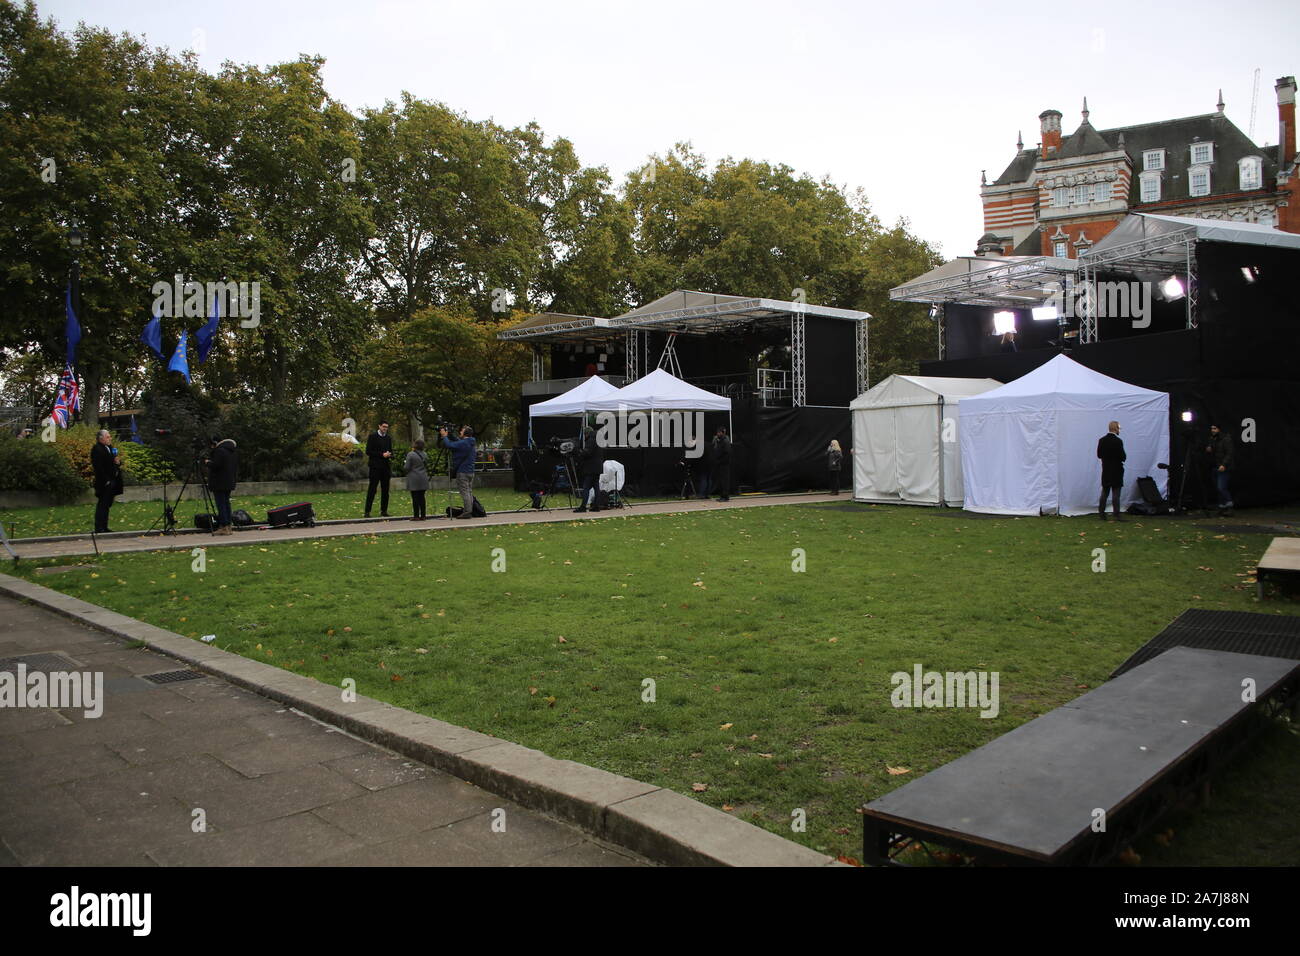 29 October 2019 London: Reporting on Brexit, a media village has sprung up outside the Houses of Parliament, London, UK Stock Photo